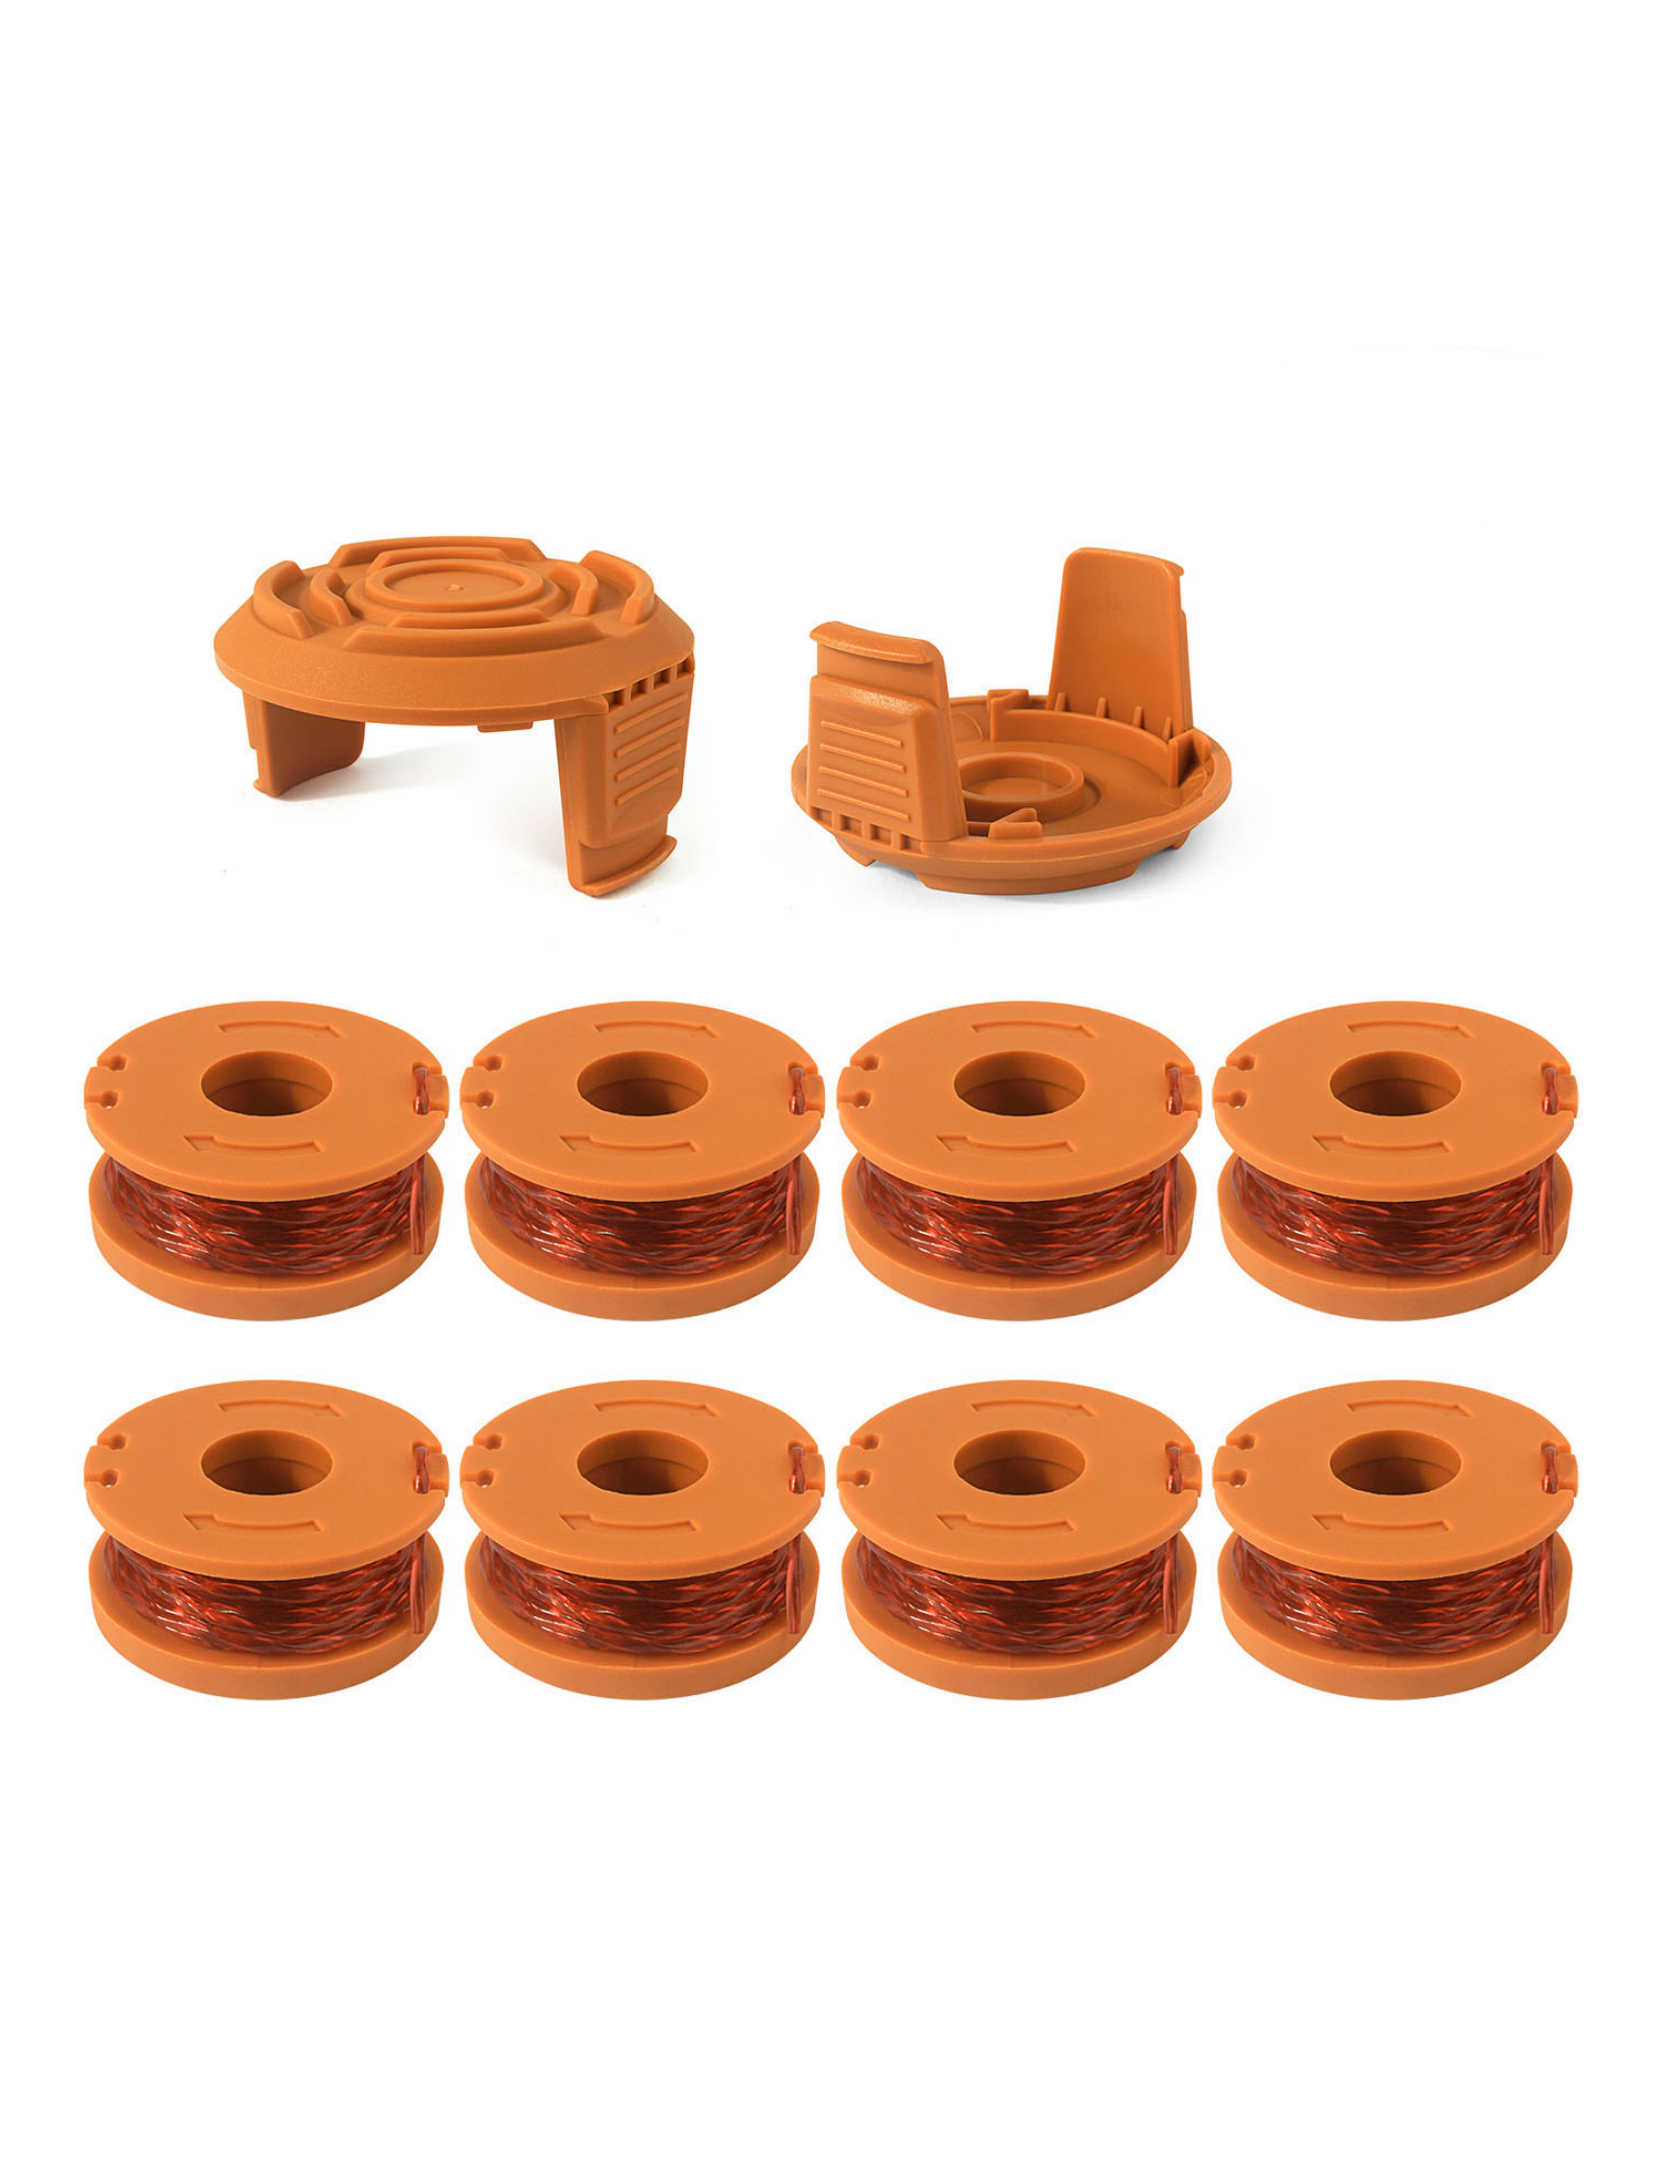 THTEN Replacement Trimmer Spool Line for Worx WA0010 WG180 WG163 Weed Wacker Spool with WA6531 GT Spool Cover 50006531 String Trimmer Refills 10ft 0.065" 10 Pack (8 Spools, 2 Trimmer Cap)